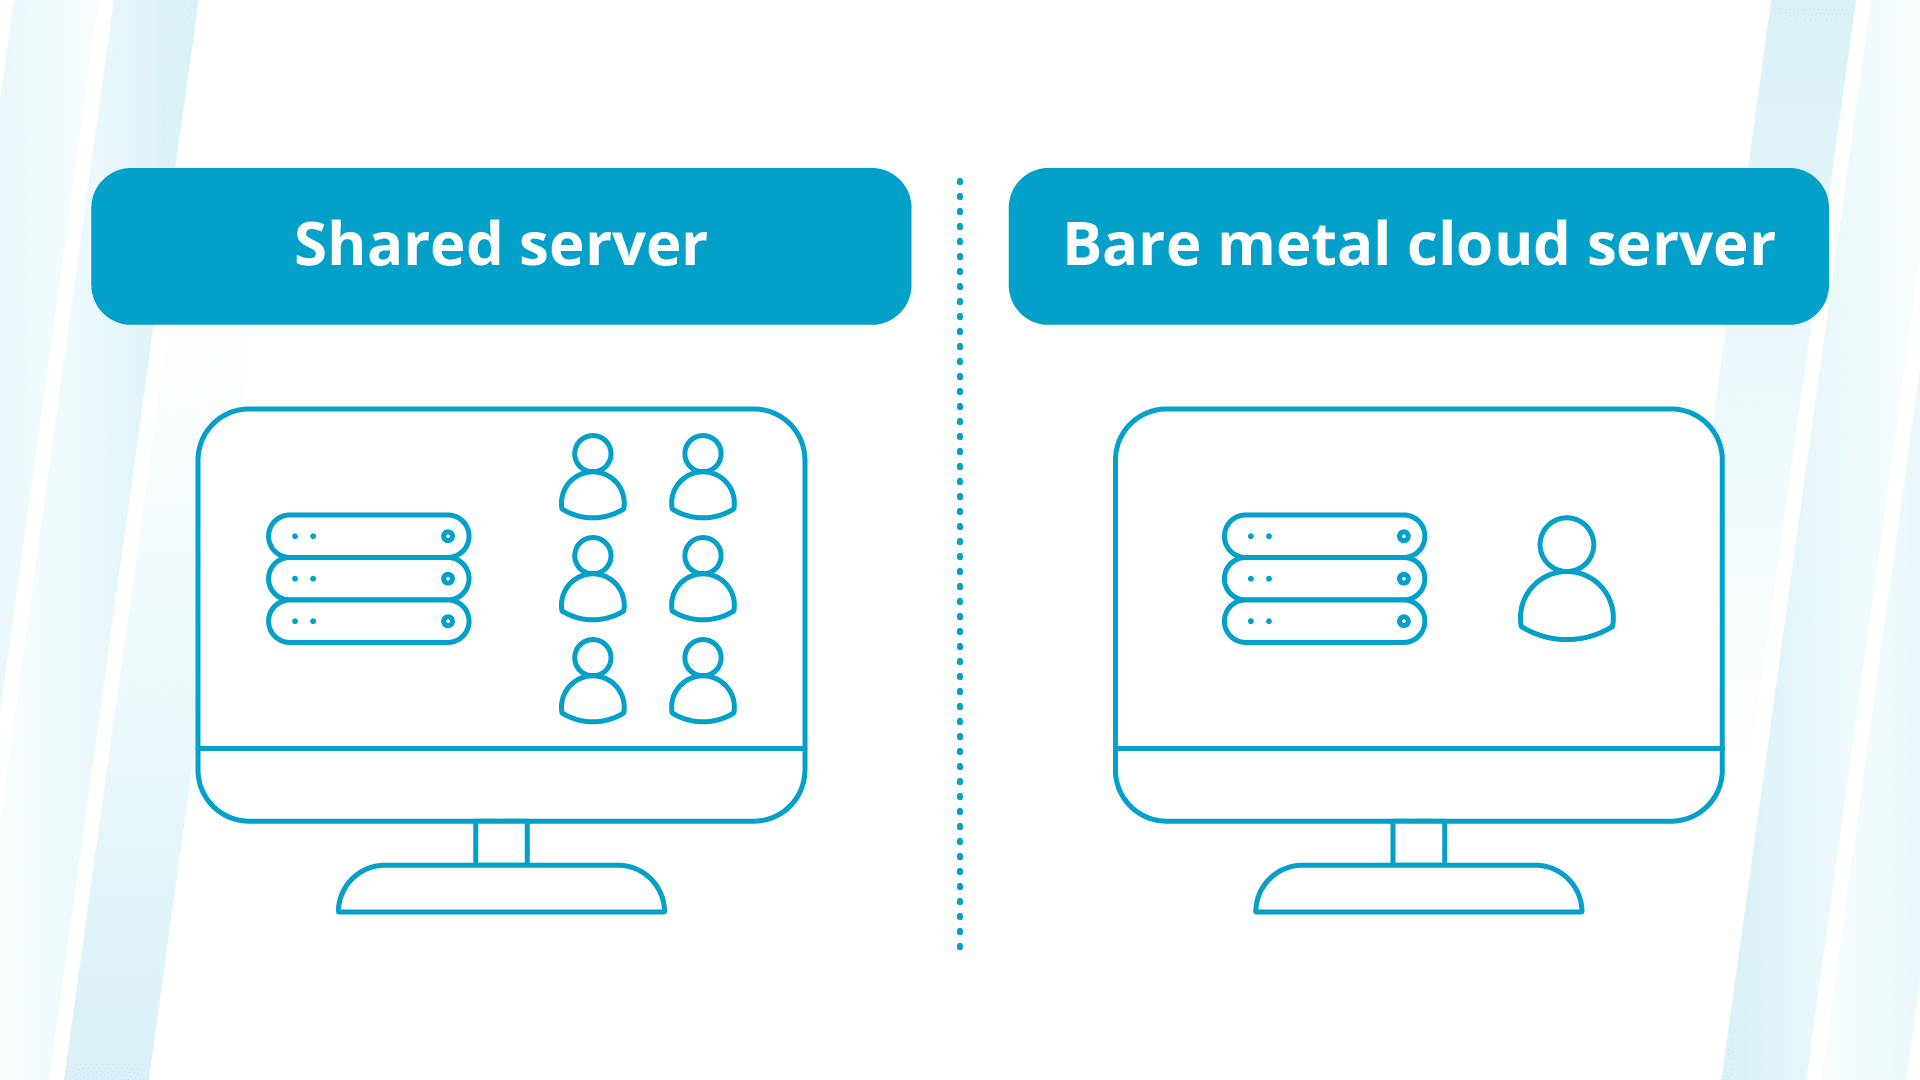 With a bare metal cloud server, you don’t share resources with other tenants.